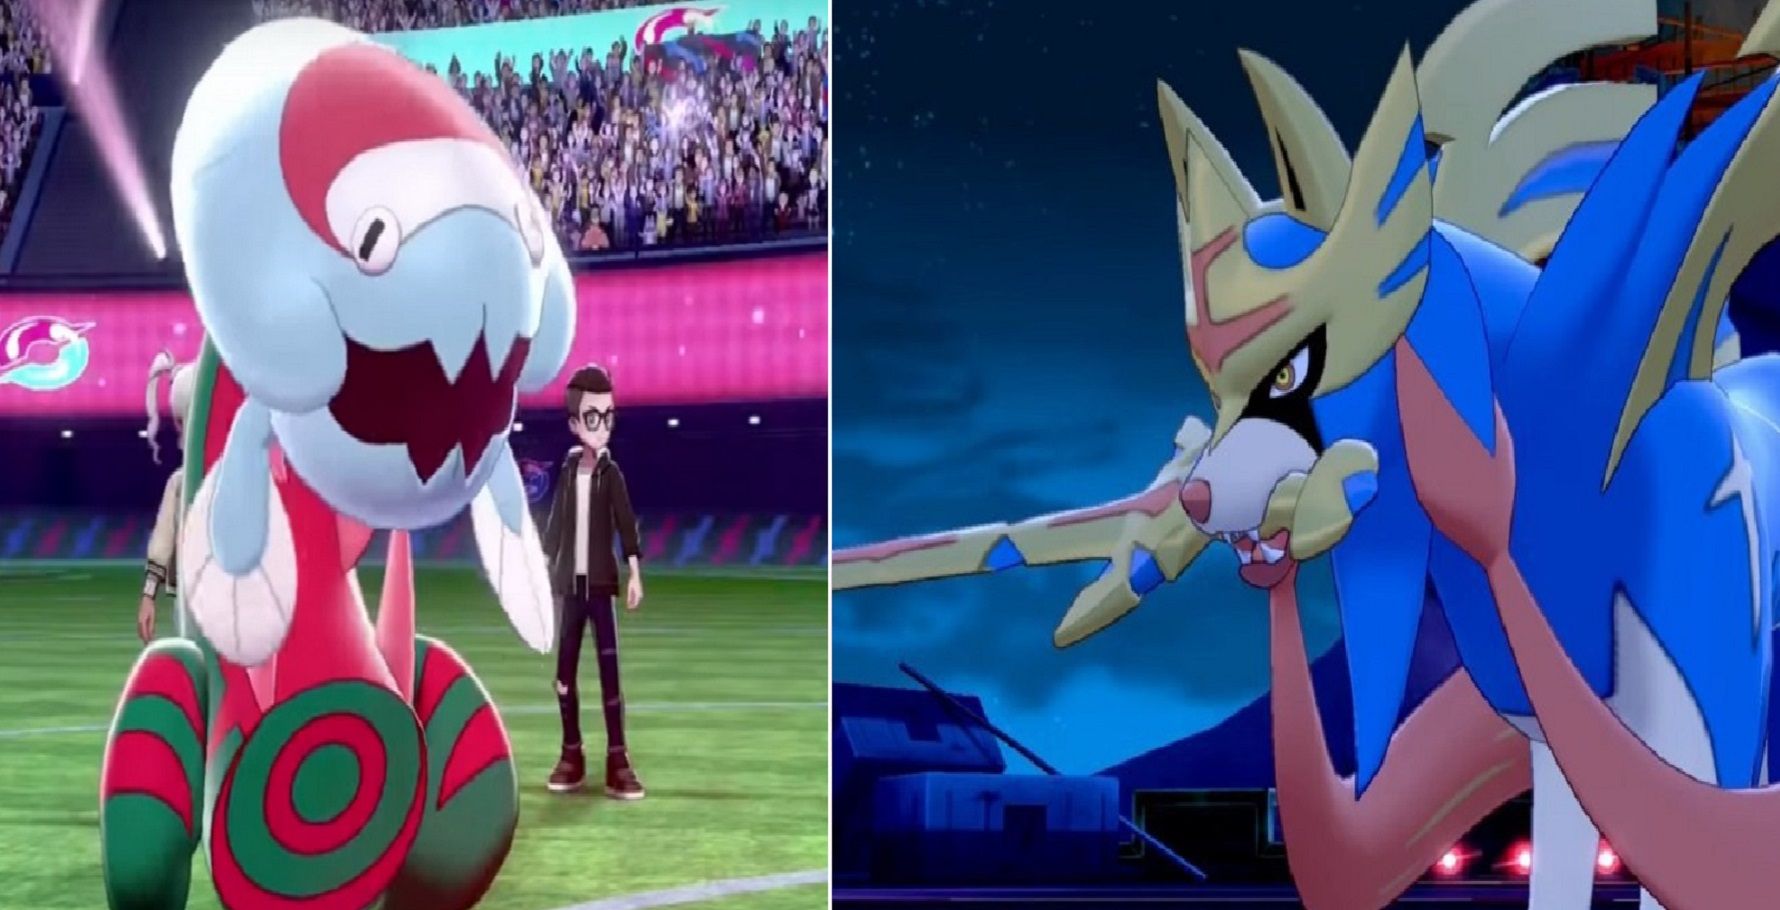 Pokémon Sword & Shield: 10 Pokémon You Can Have That Will Make Your Party OP